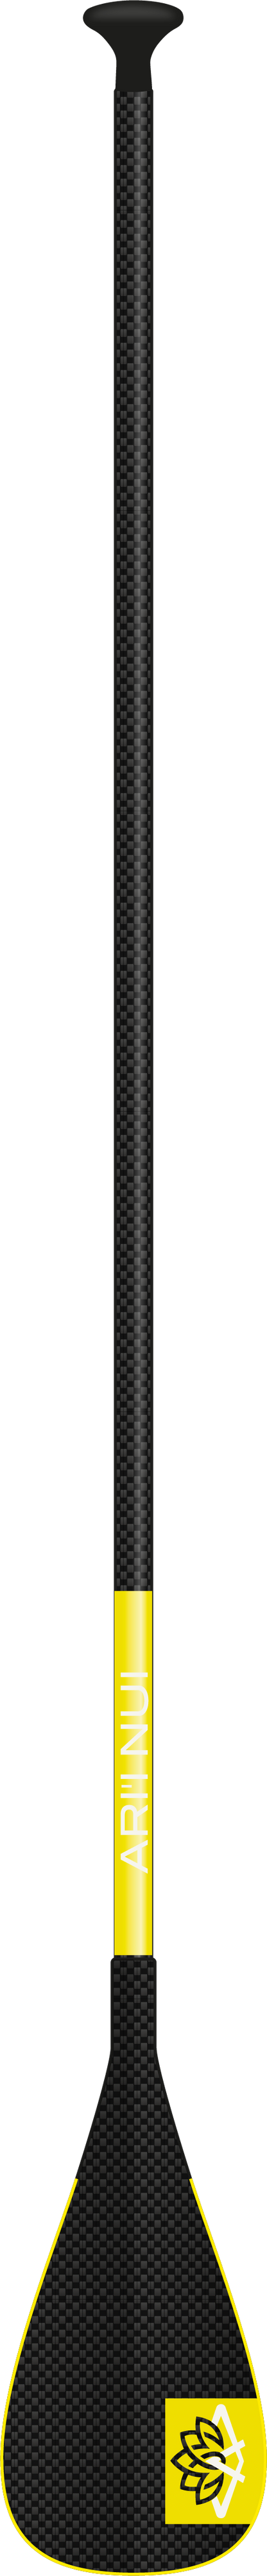 Full Carbon Paddle